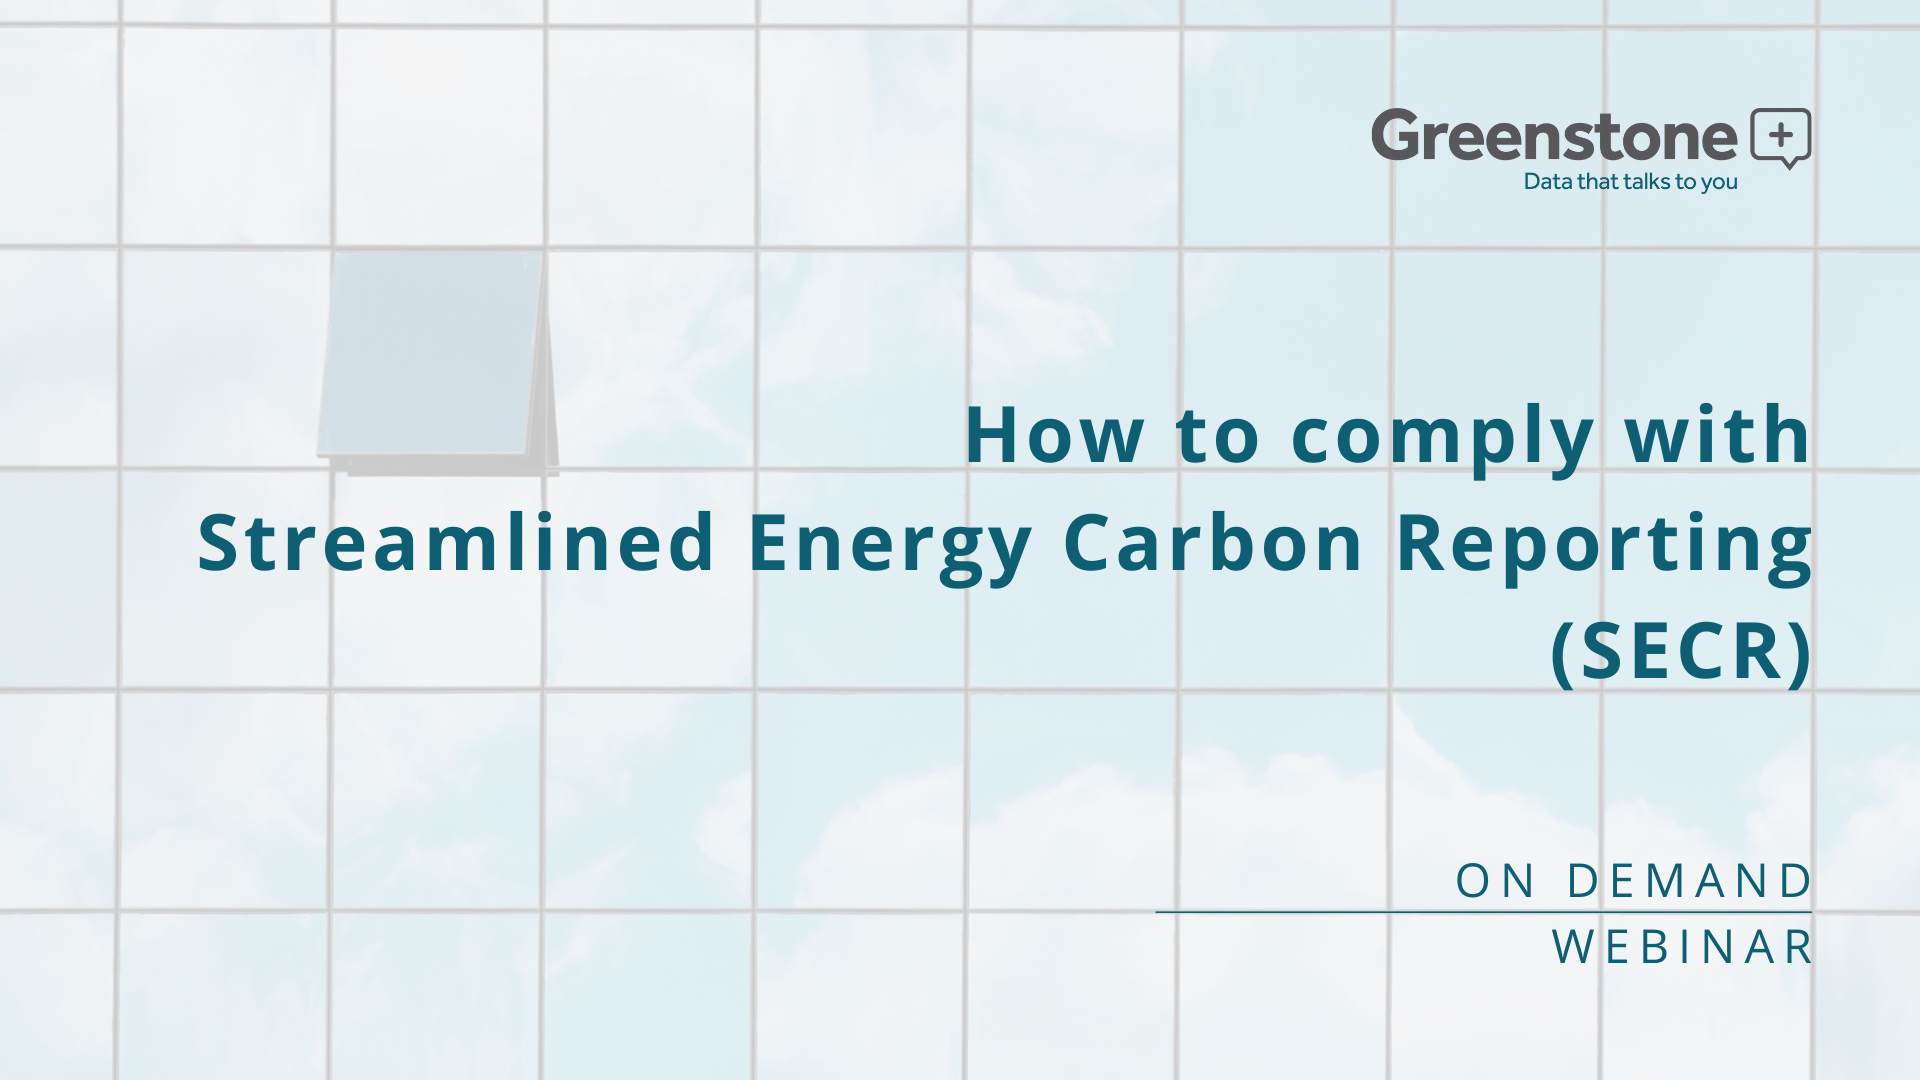 How to comply with Streamlined Energy Carbon Reporting (SECR)